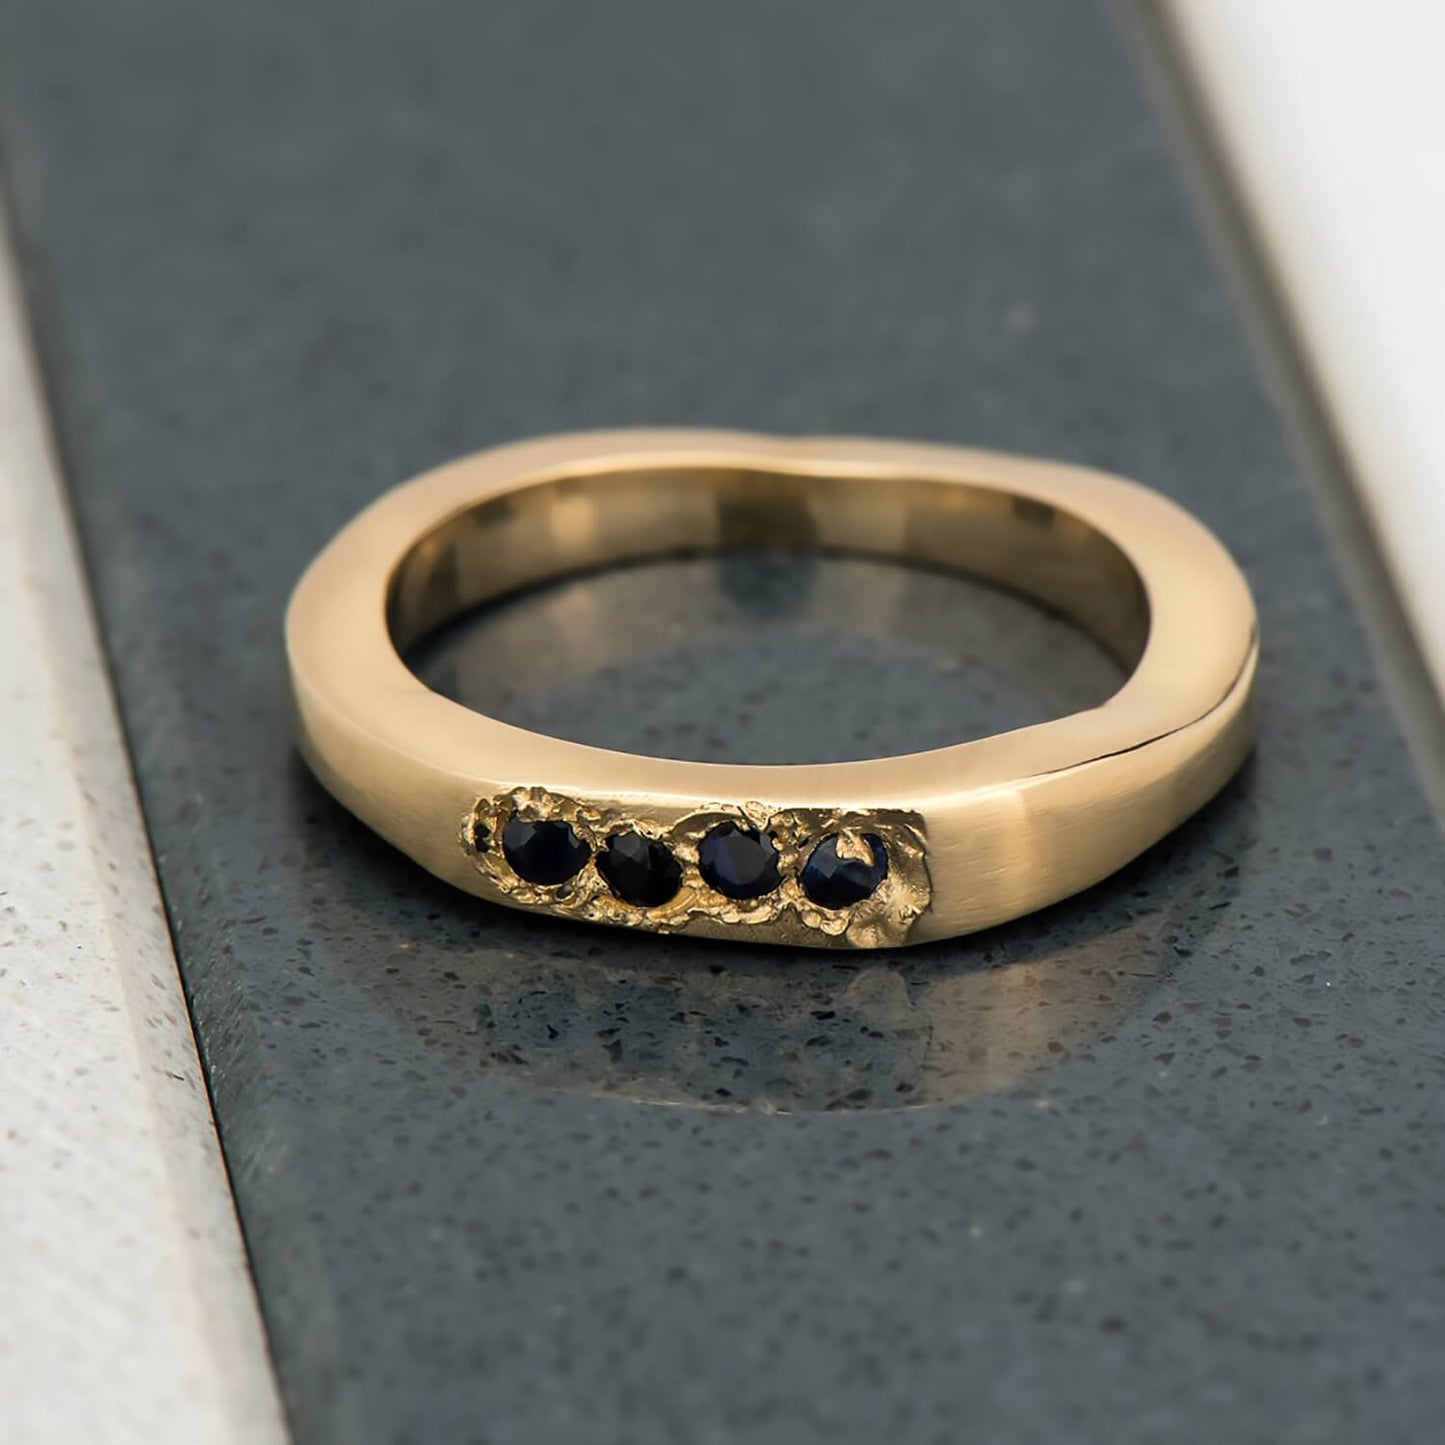 Recycled 14 karat yellow gold signet ring with four 2mm natural blue sapphires in which have been set in cast, casted. The surroundings of the stones have been finished with a rough baroque texture and the band is an irregular shape.